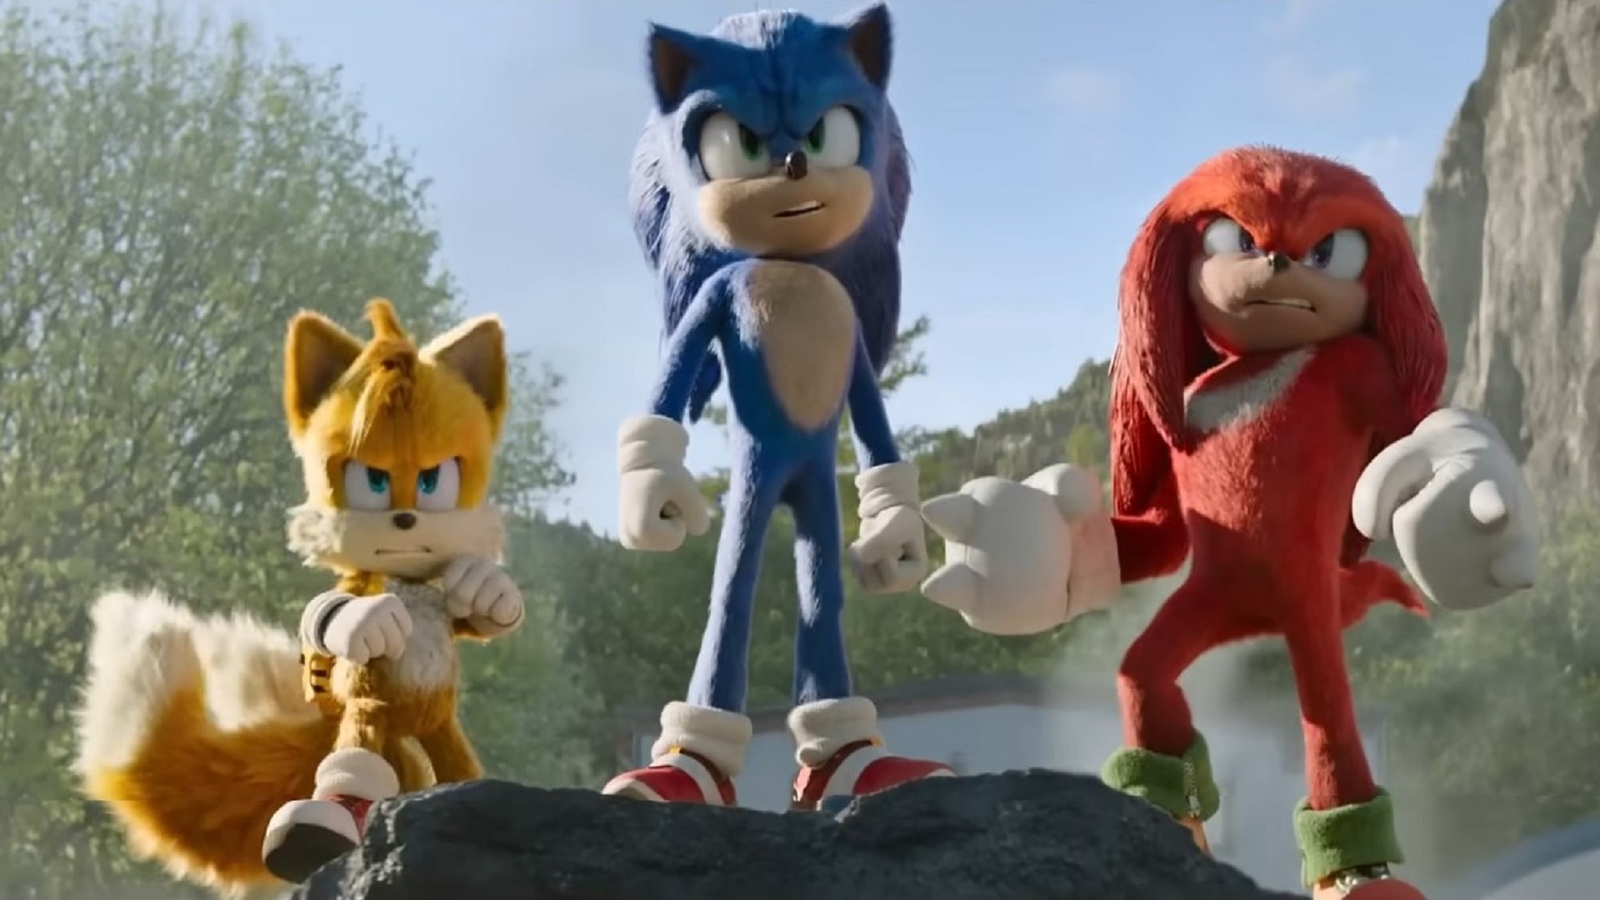 SONIC 2 is a Fantastic Family-Friendly Film